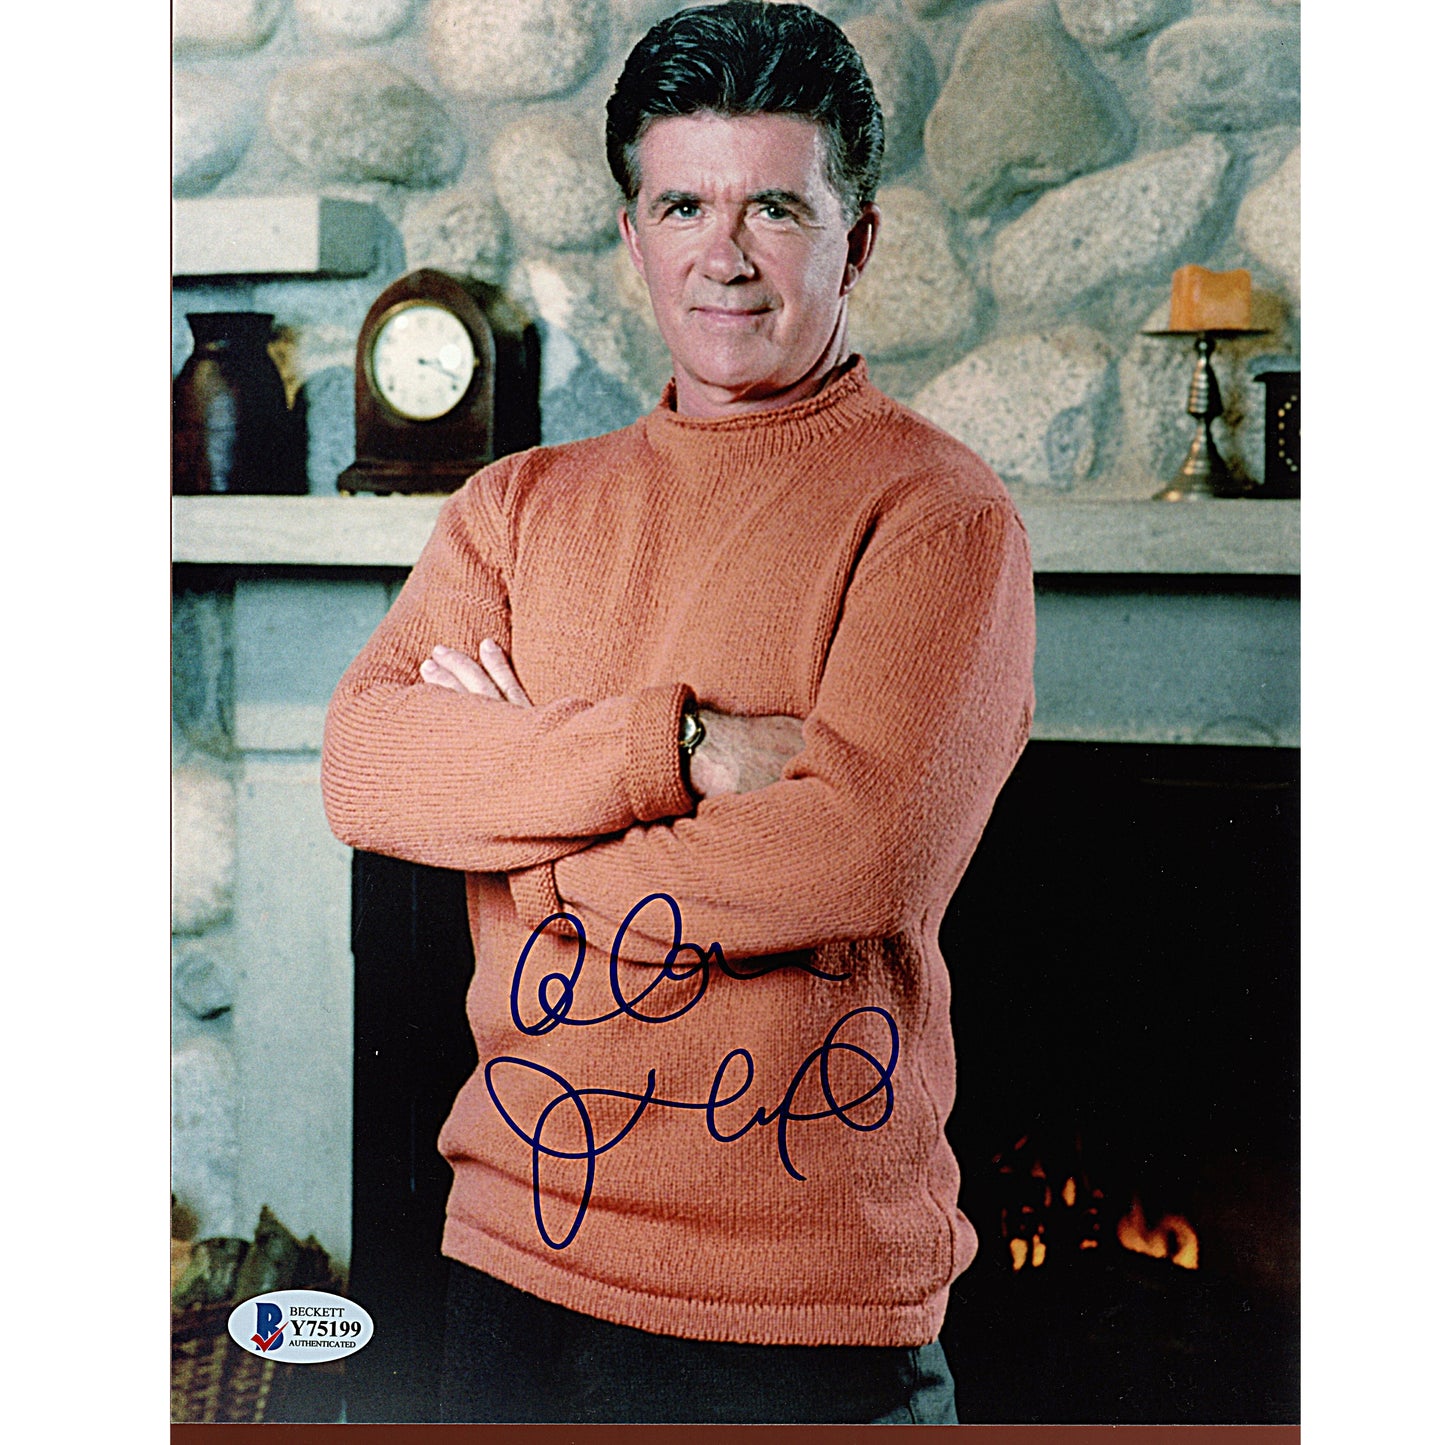 Hollywood- Autographed- Alan Thicke Signed Growing Pains 8x10 Photo Beckett BAS Authentication 102a